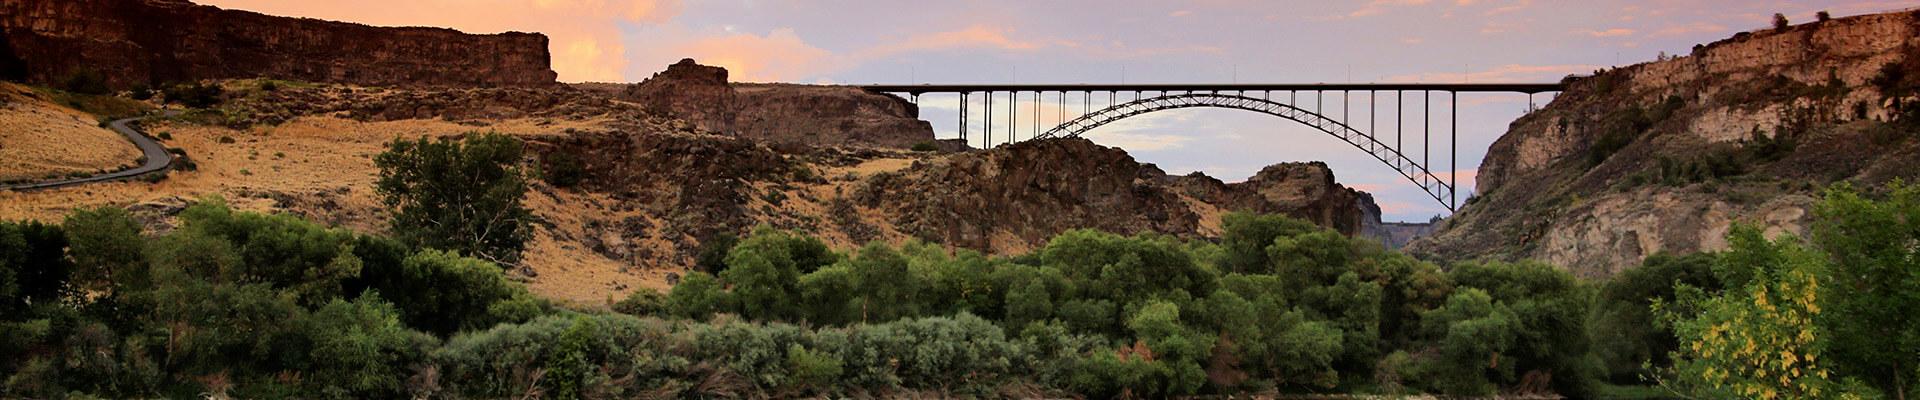 The Perrine Bridge viewed from the canyon.